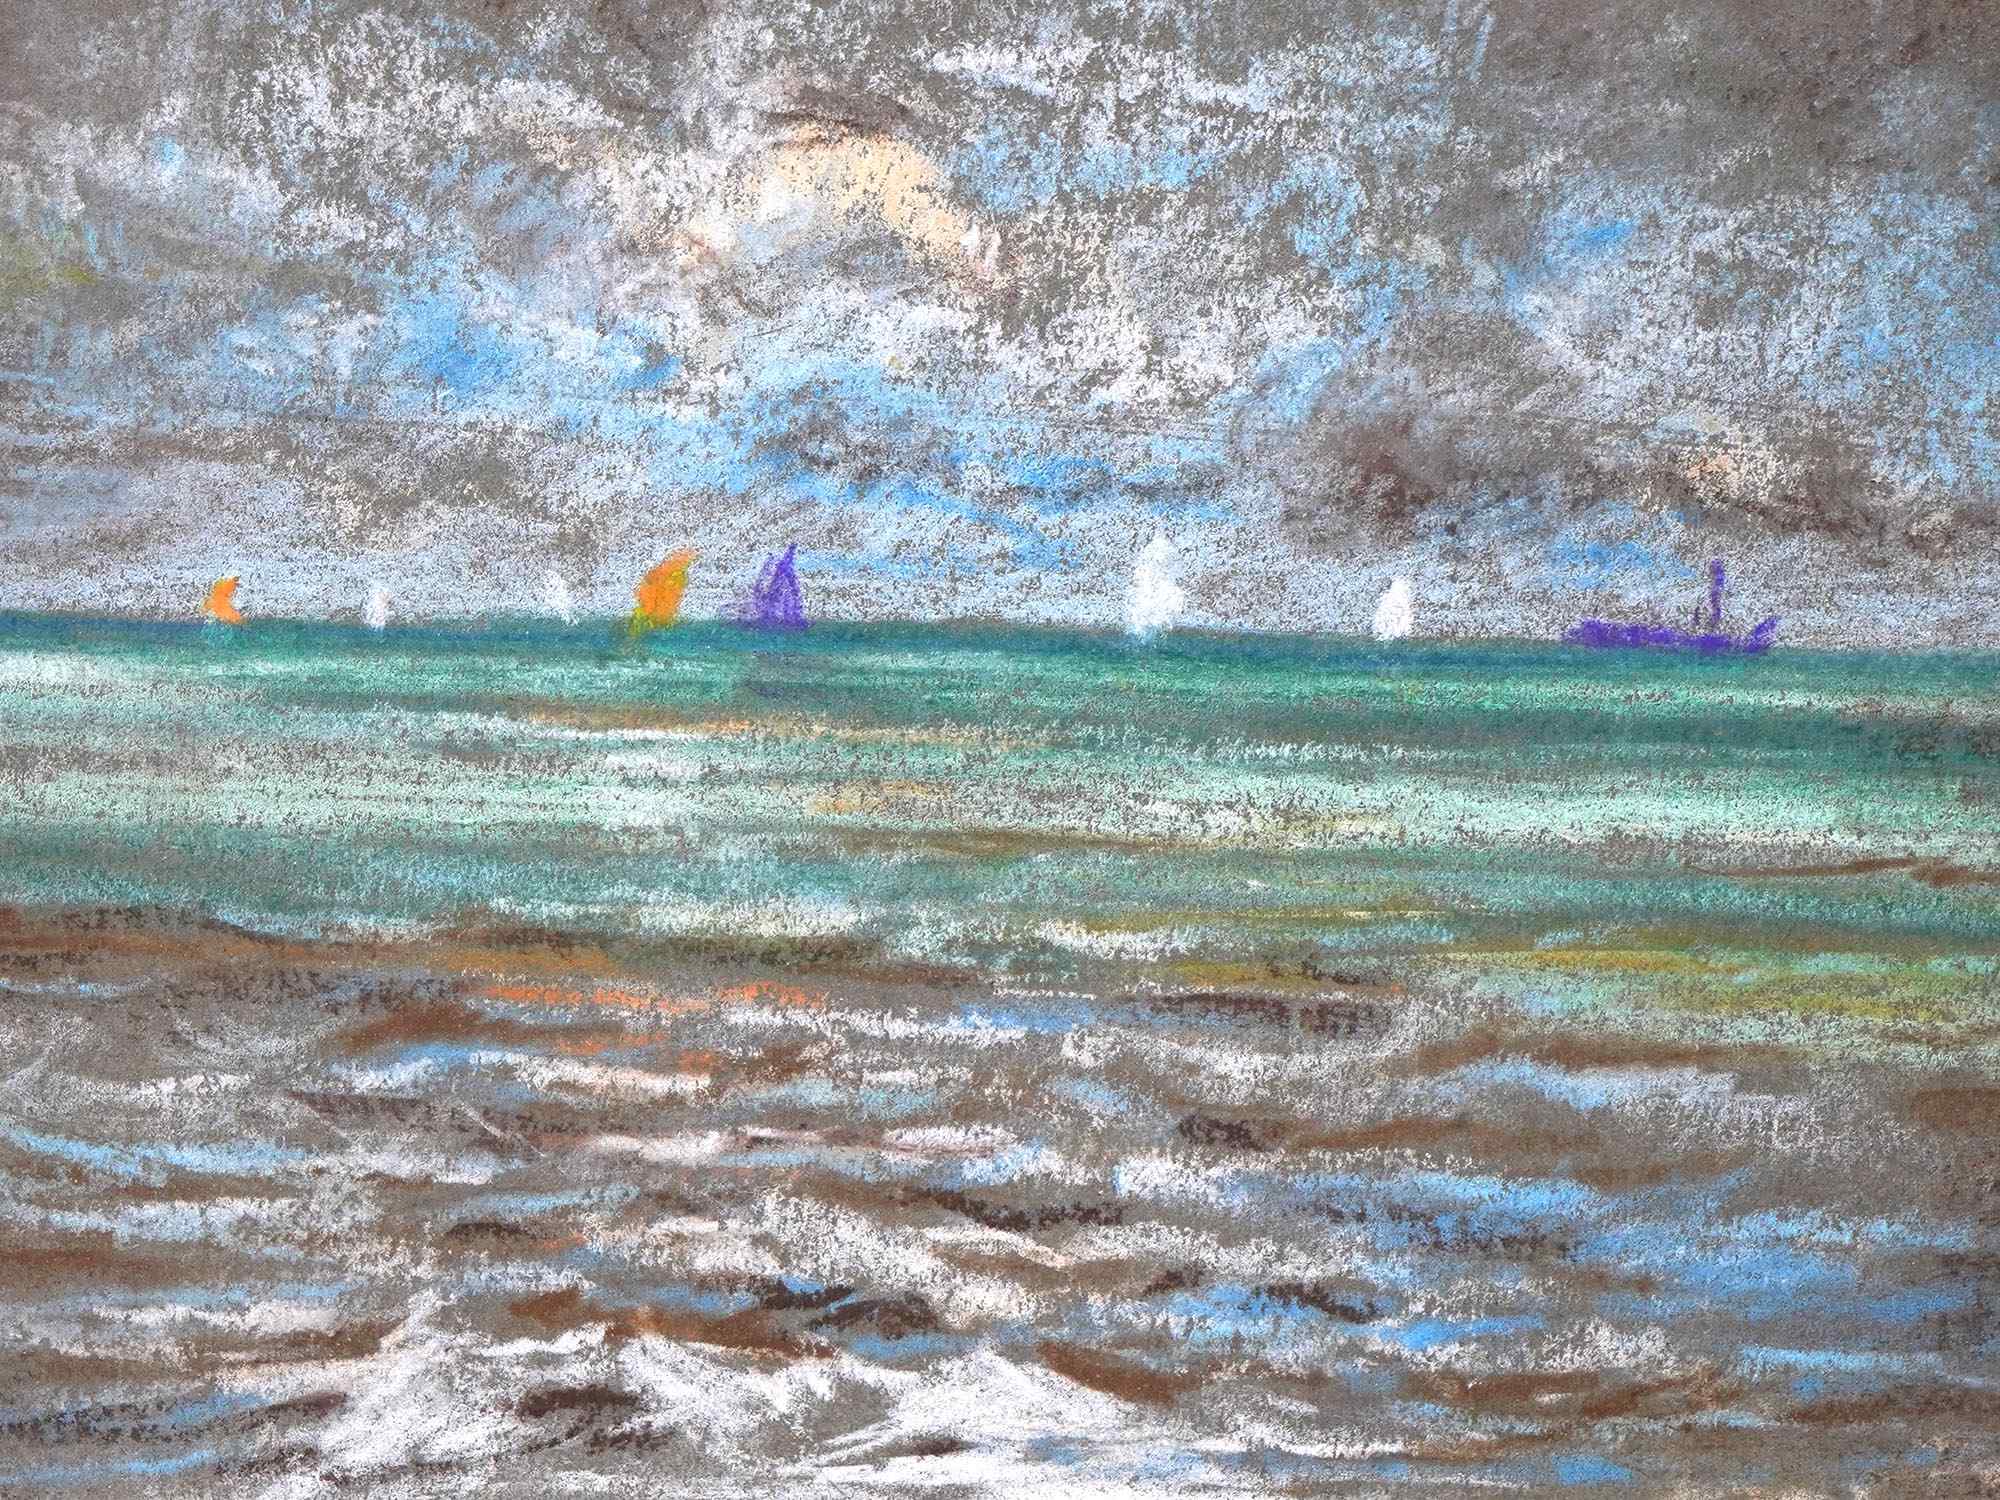 SEASCAPE PASTEL PAINTING BY JAMES MCNEILL WHISTLER PIC-1